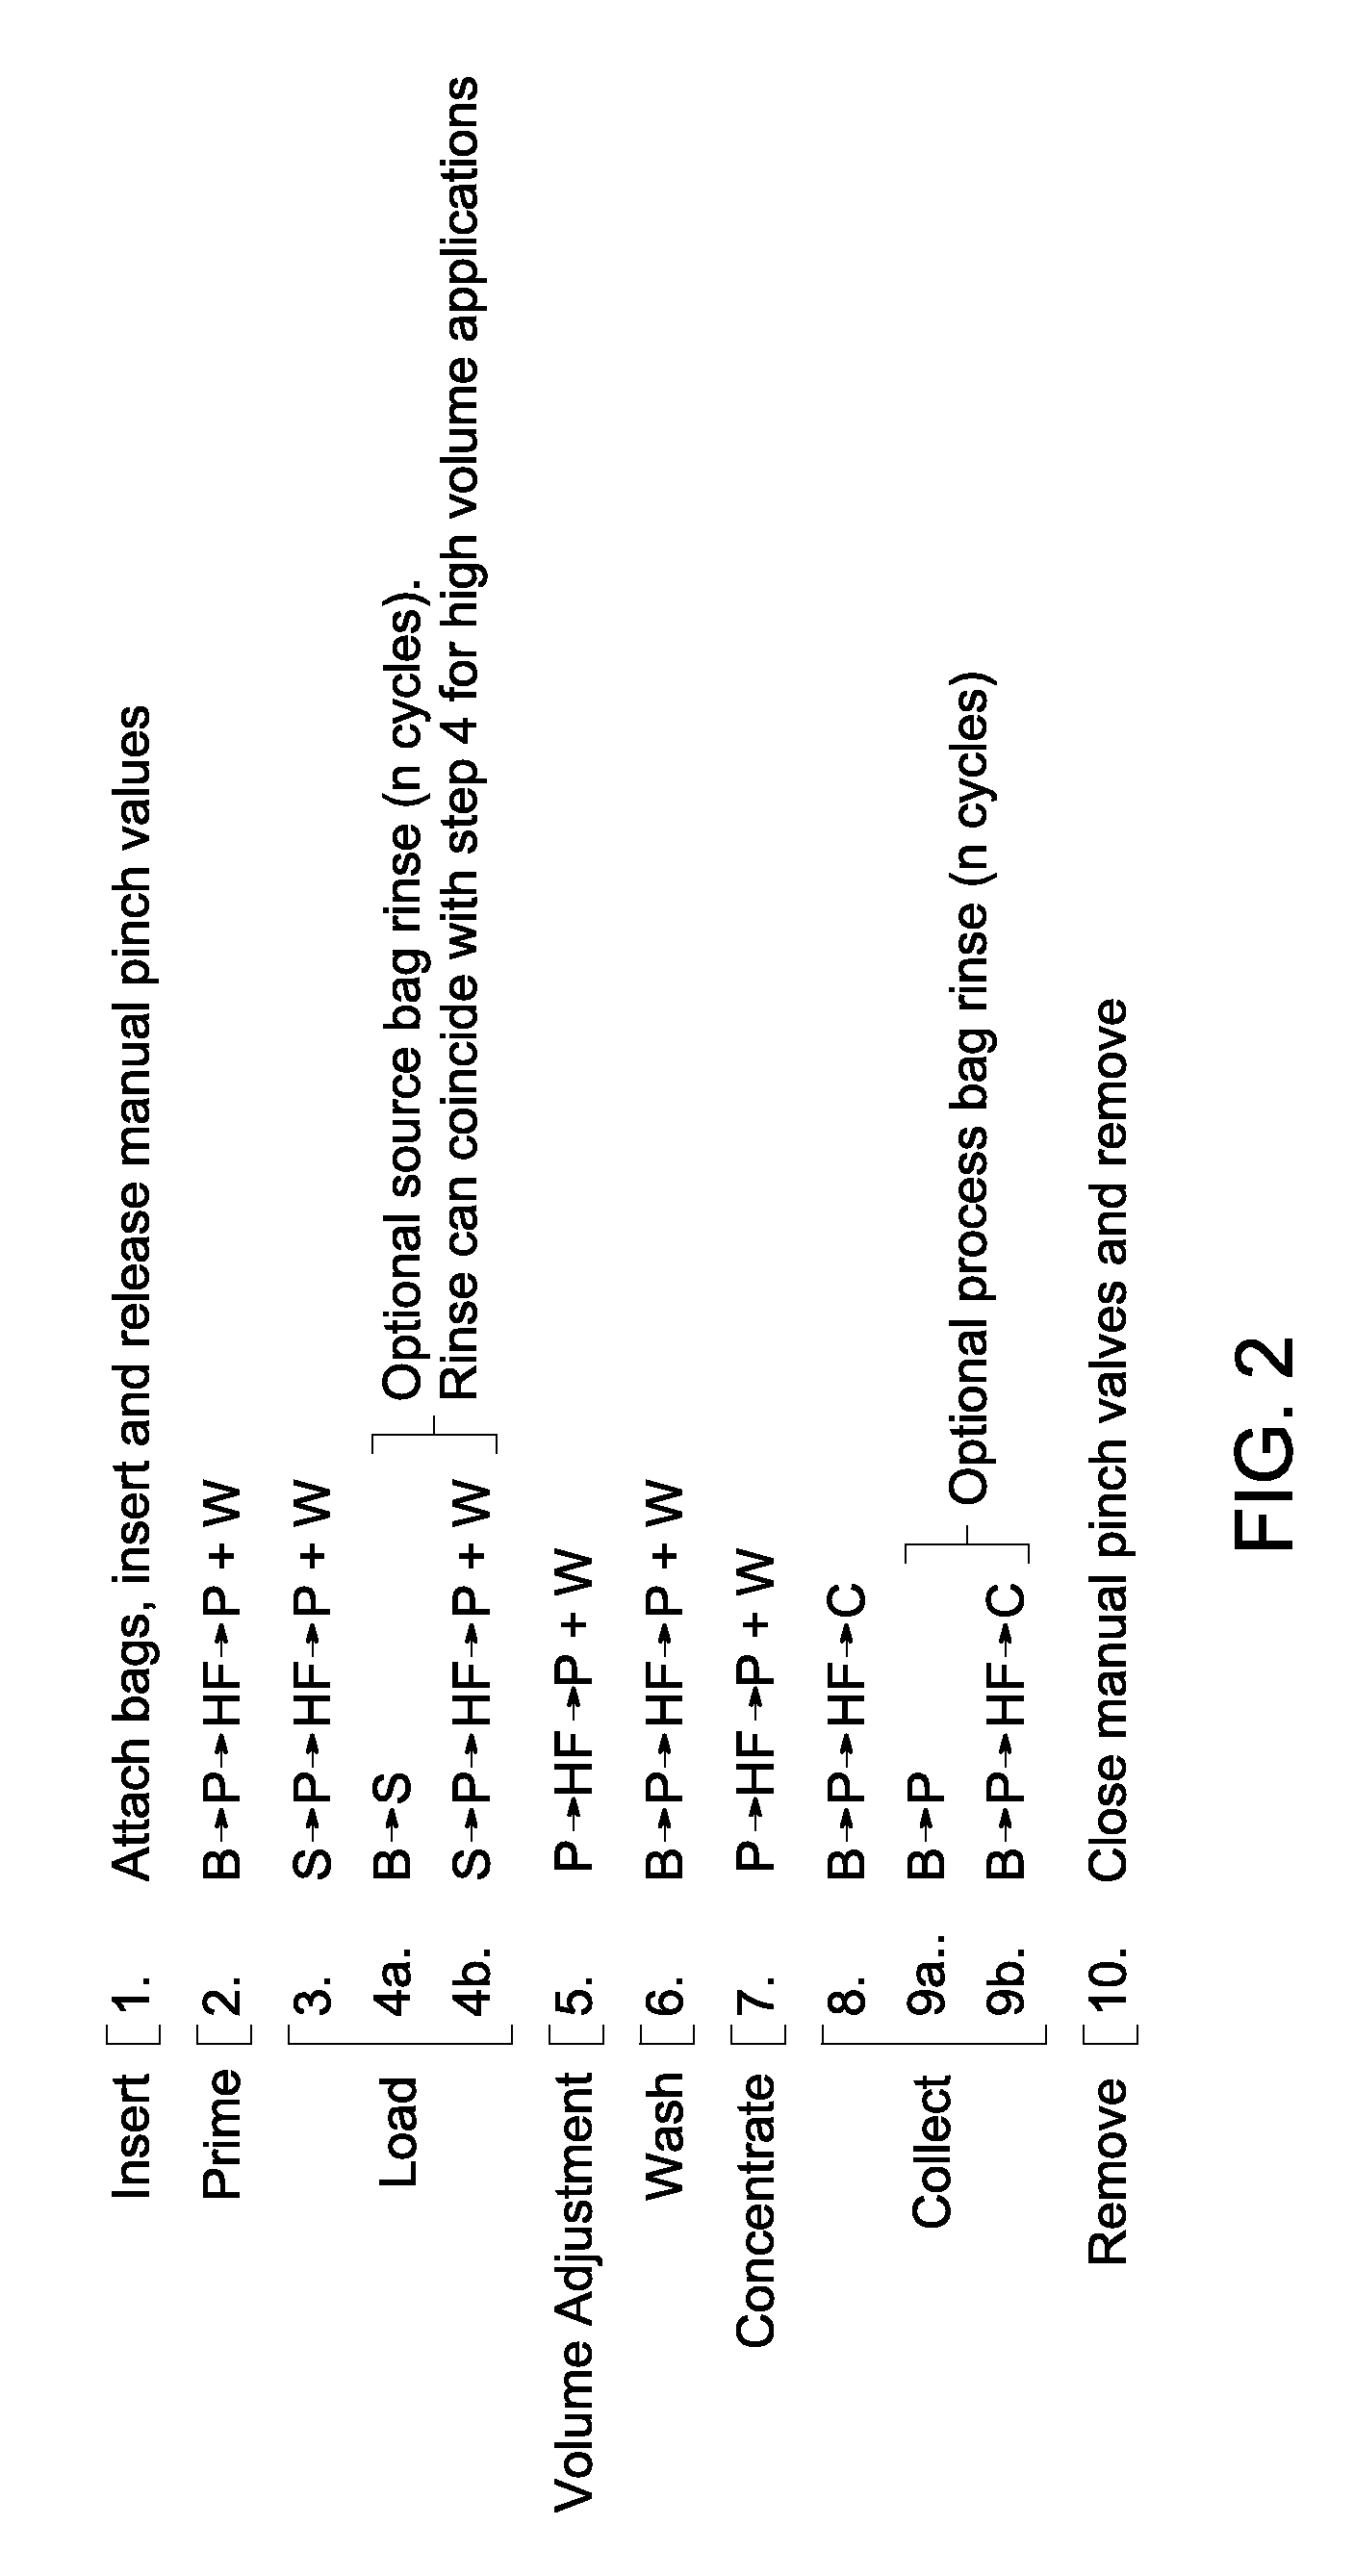 Systems, methods and control laws for cell harvesting